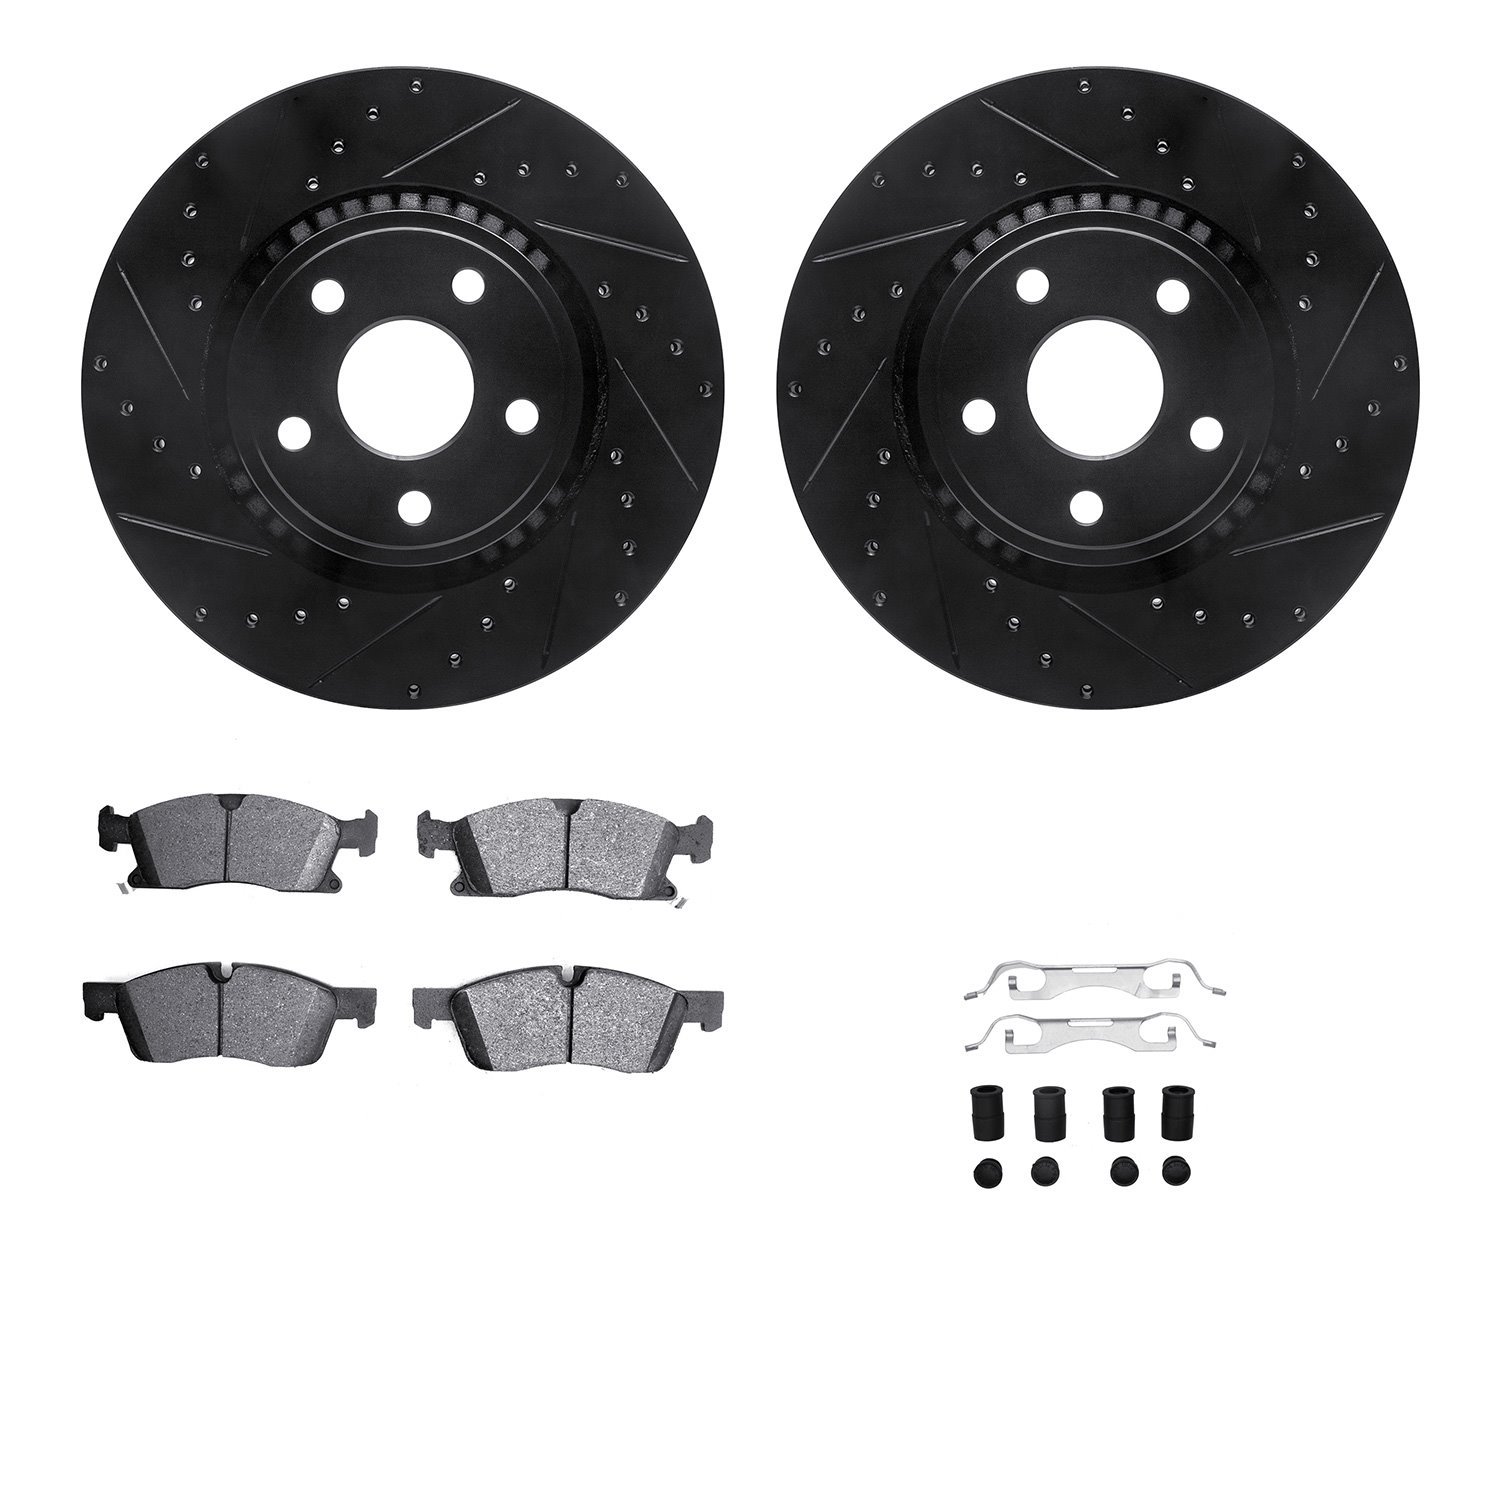 8212-42004 Drilled/Slotted Rotors w/Heavy-Duty Brake Pads Kit & Hardware [Black], Fits Select Mopar, Position: Front